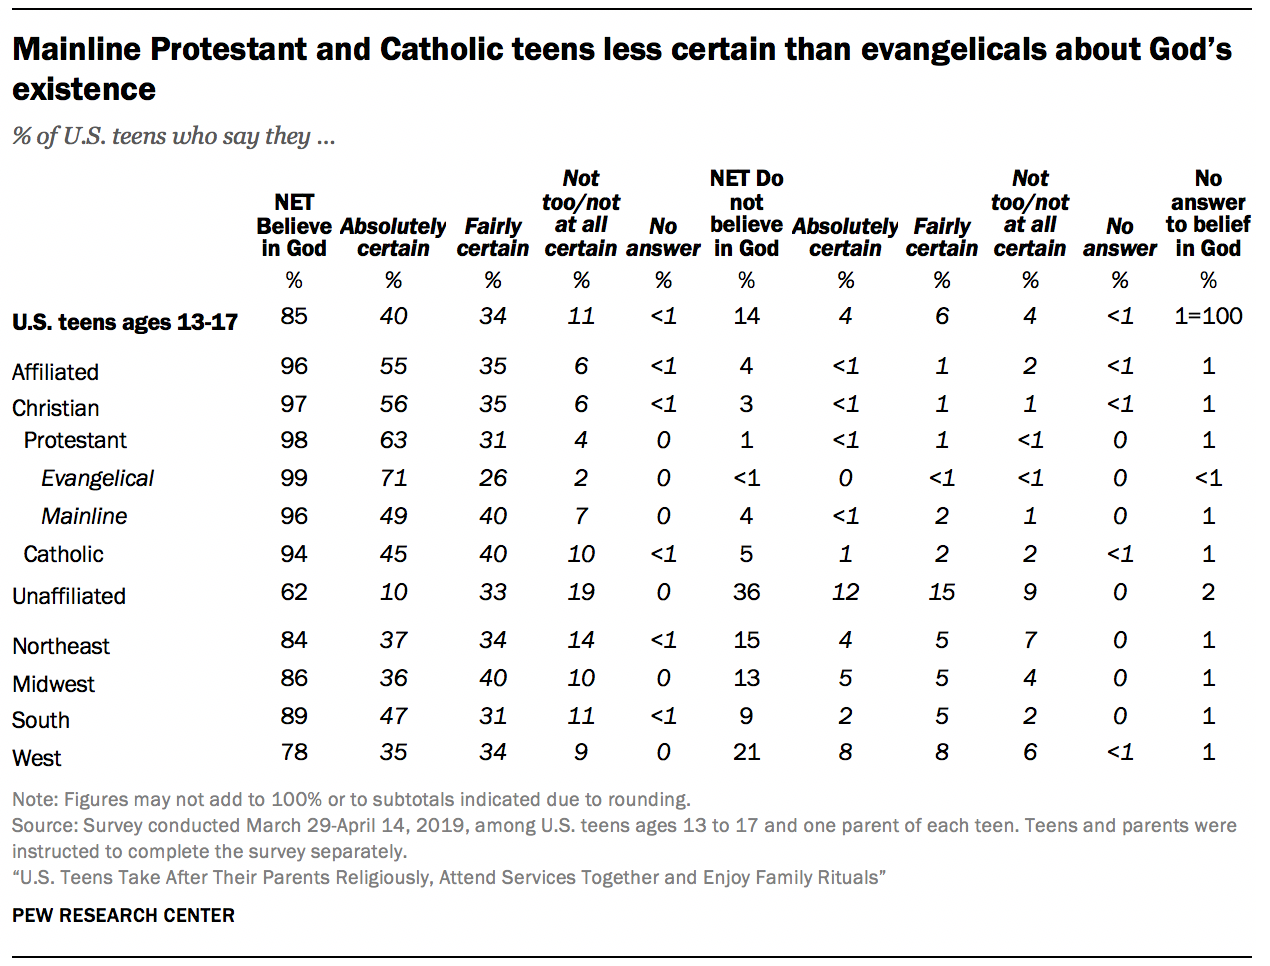 Mainline Protestant and Catholic teens less certain than evangelicals about God’s existence